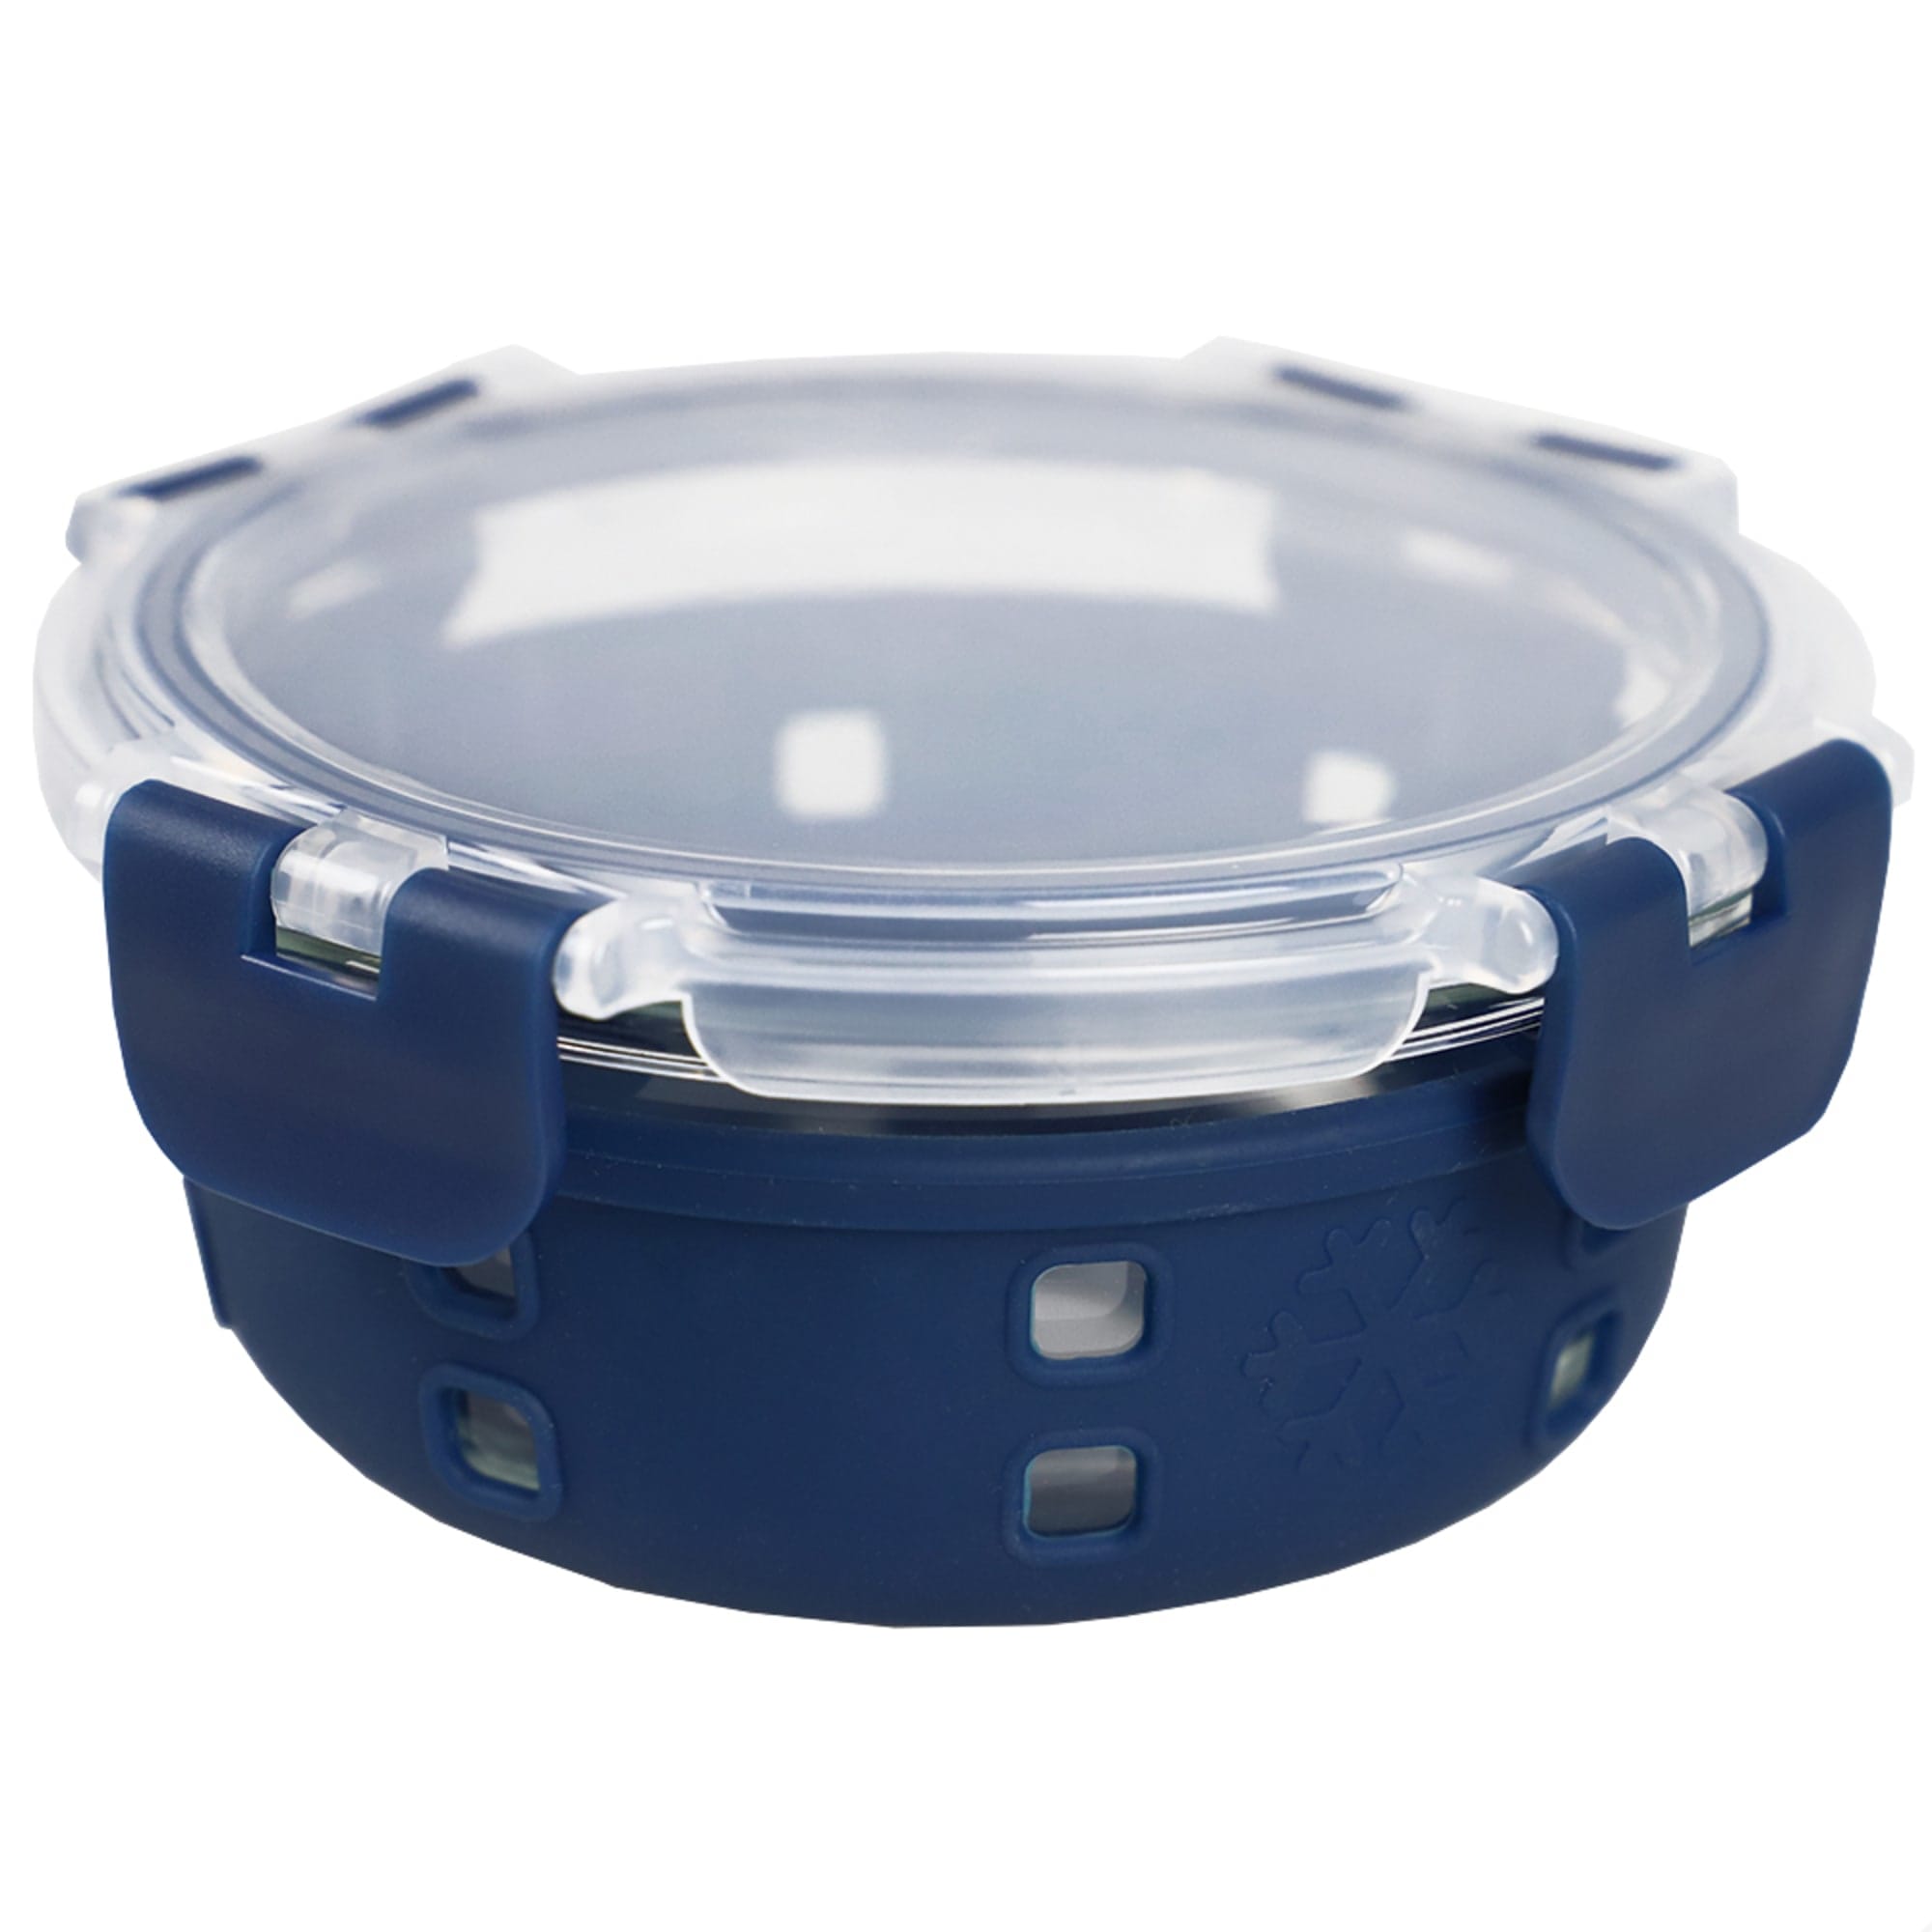 Michael Graves Design Round 13 Ounce High Borosilicate Glass Food Storage Container with Plastic Lid, Indigo $5.00 EACH, CASE PACK OF 12